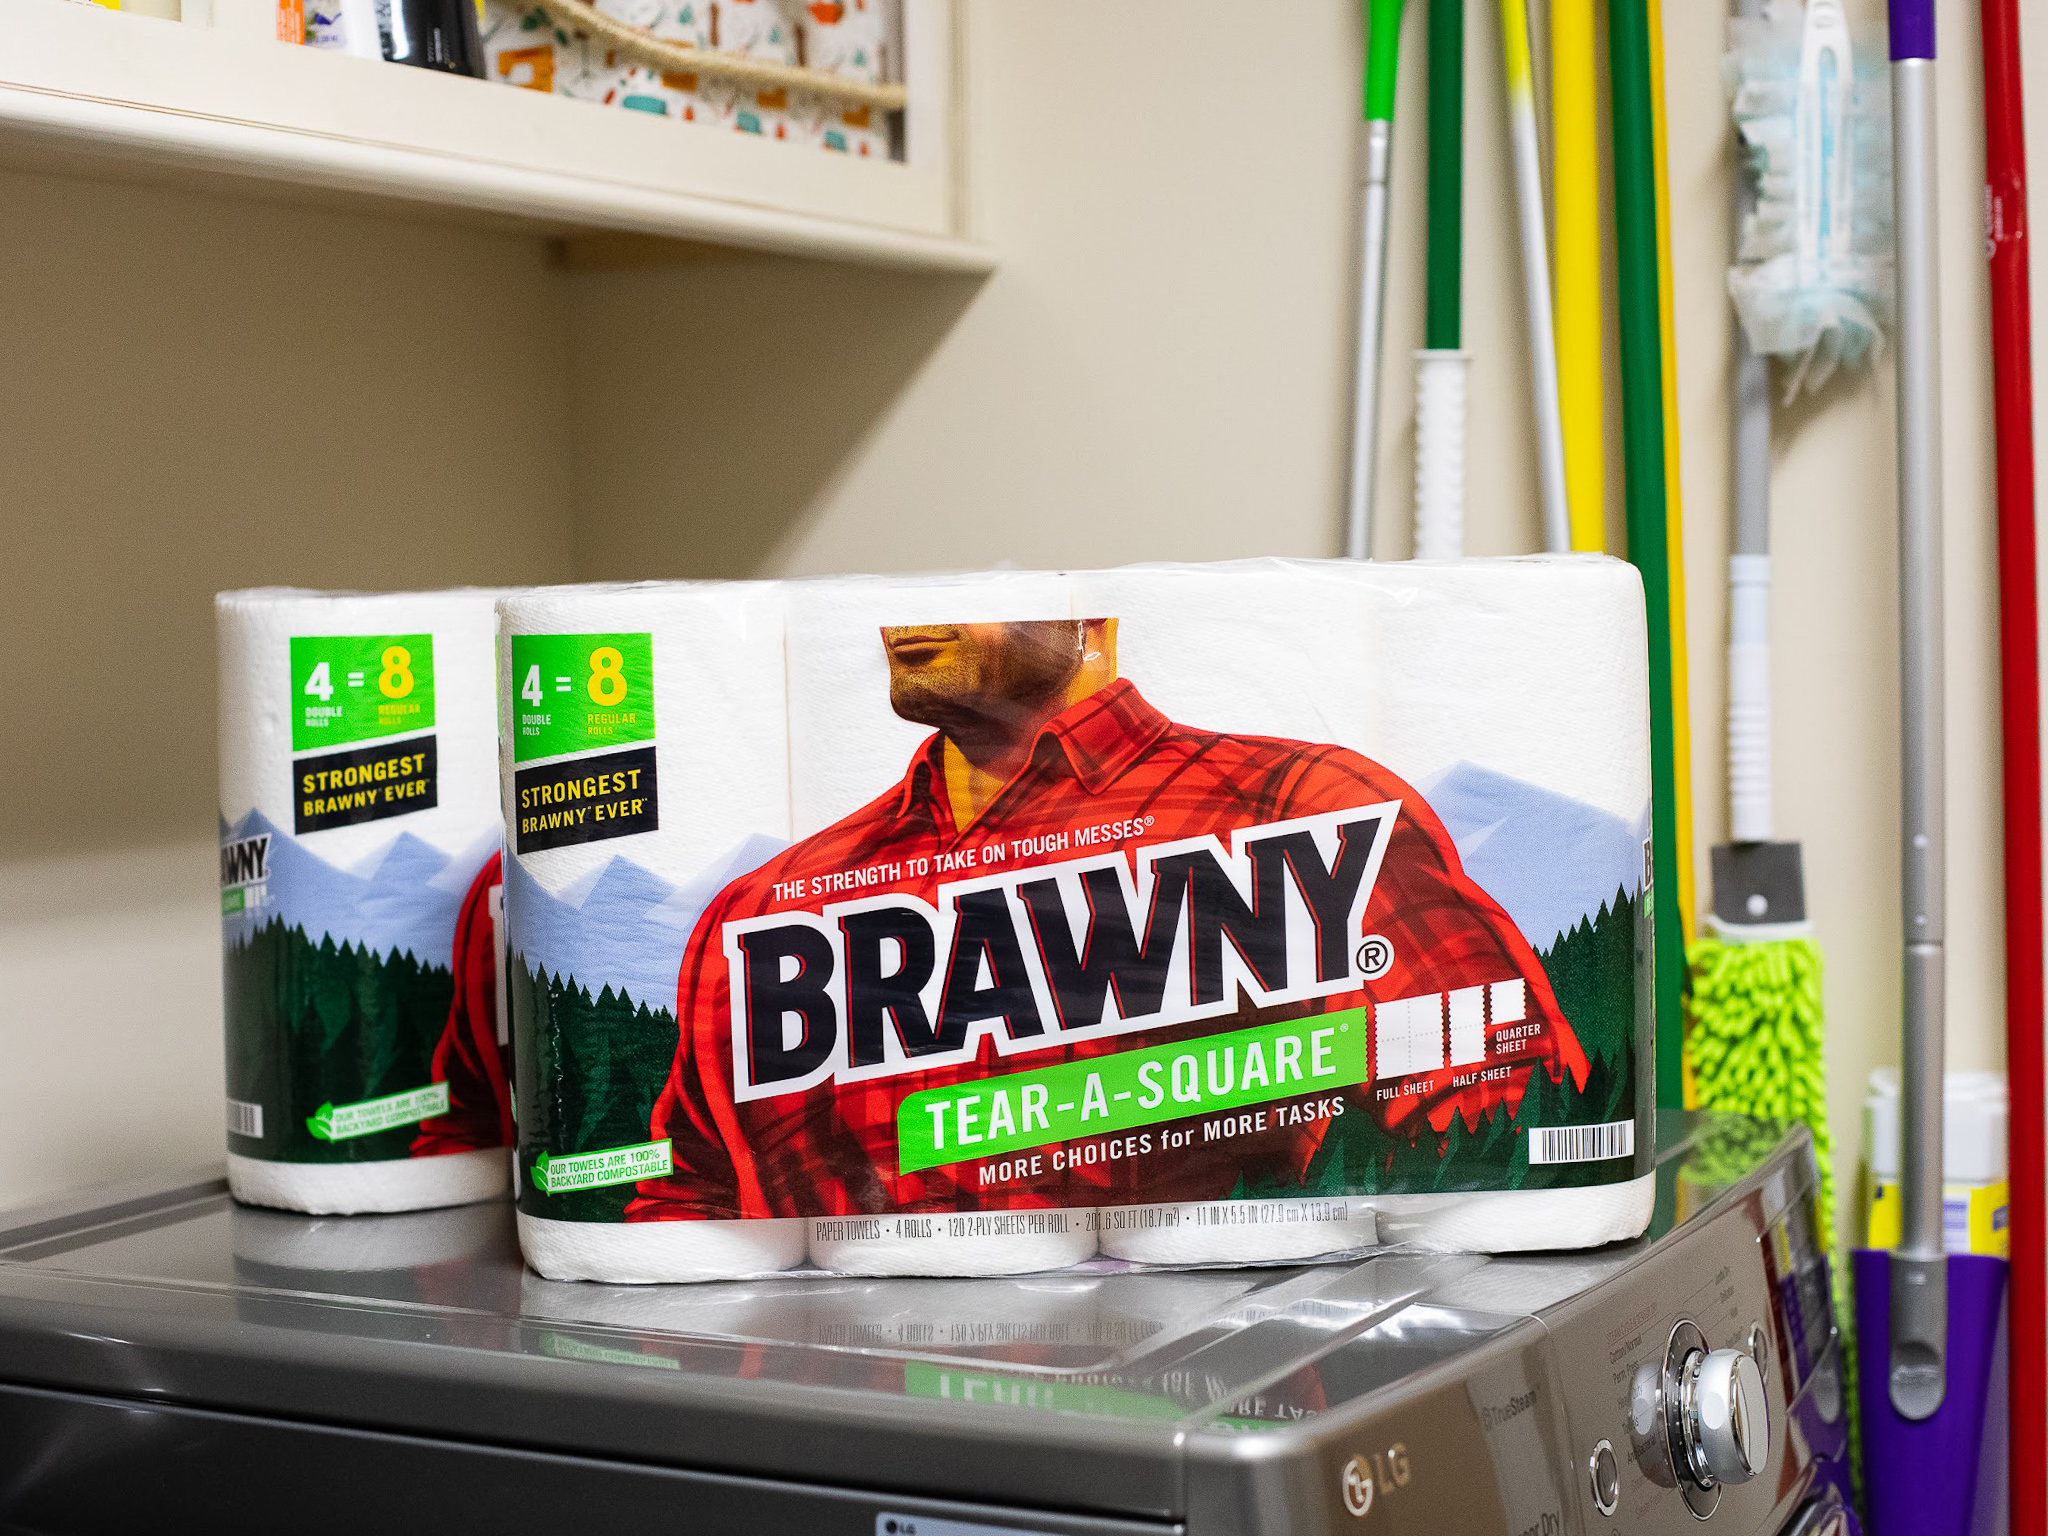 Brawny Paper Towels Are Just $4.15 At Publix (Regular Price $10.29!)